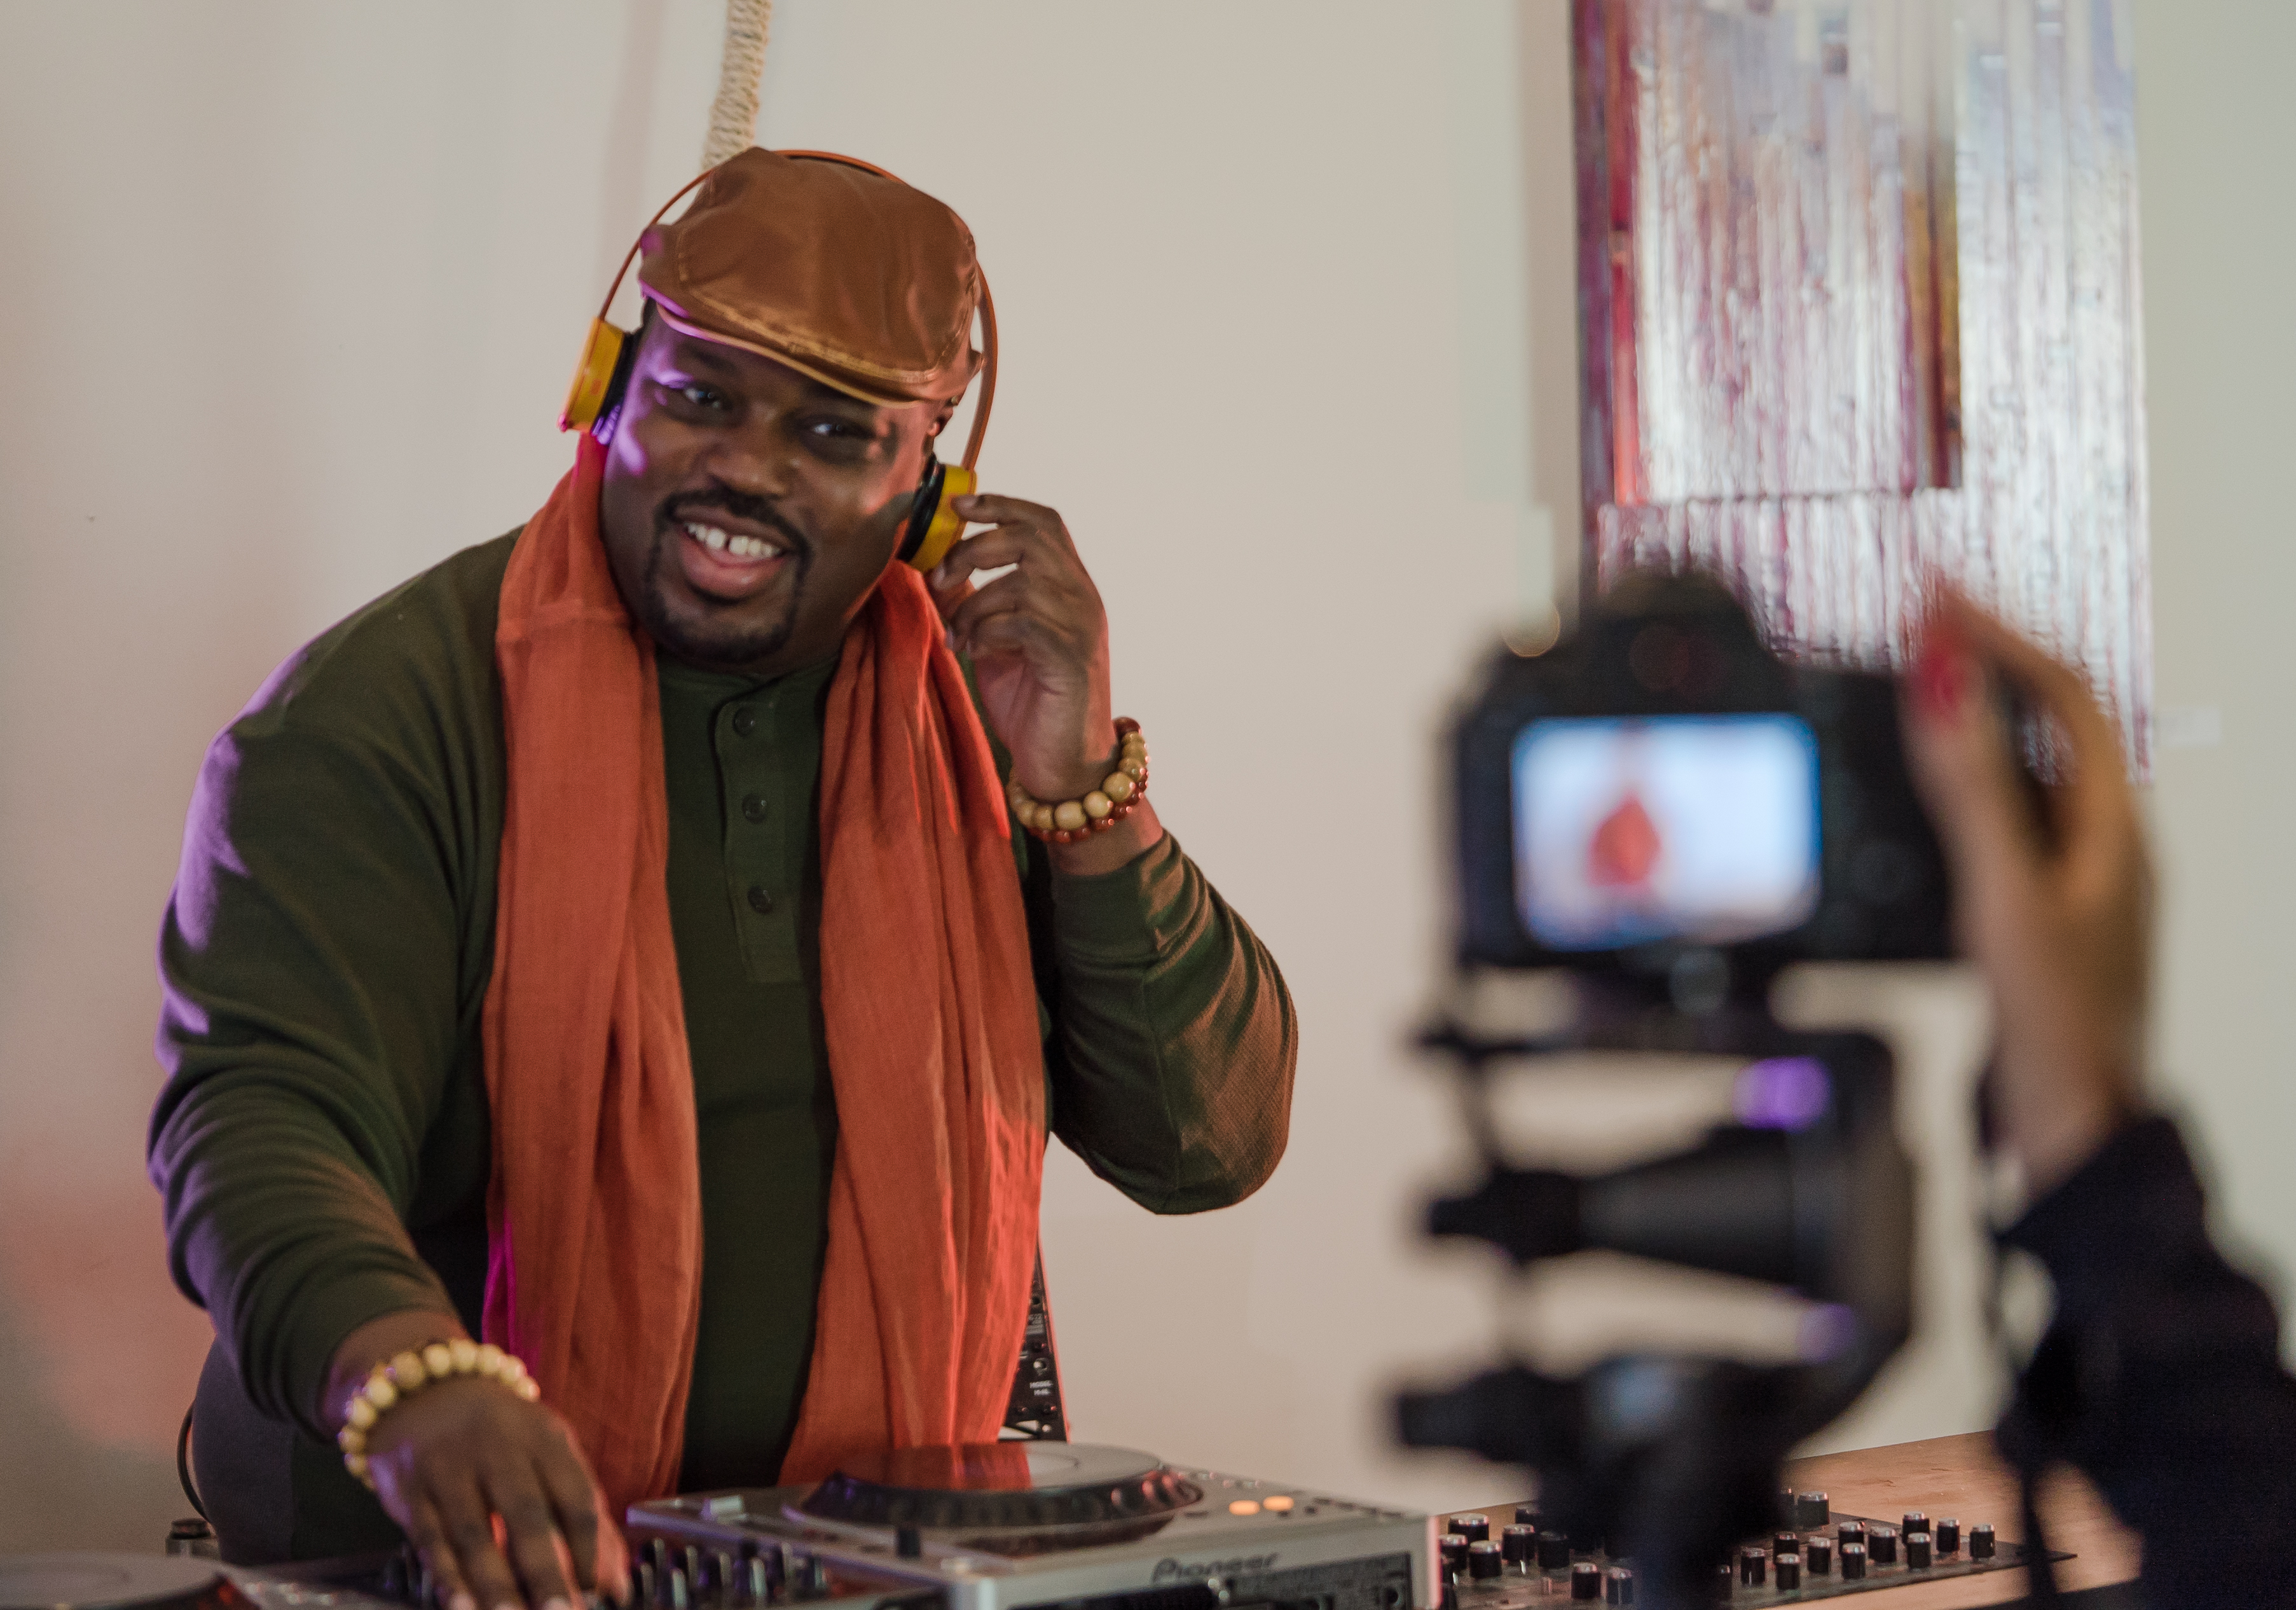 DJ Duane Powell brings an eclectic nuance to the House Music genre